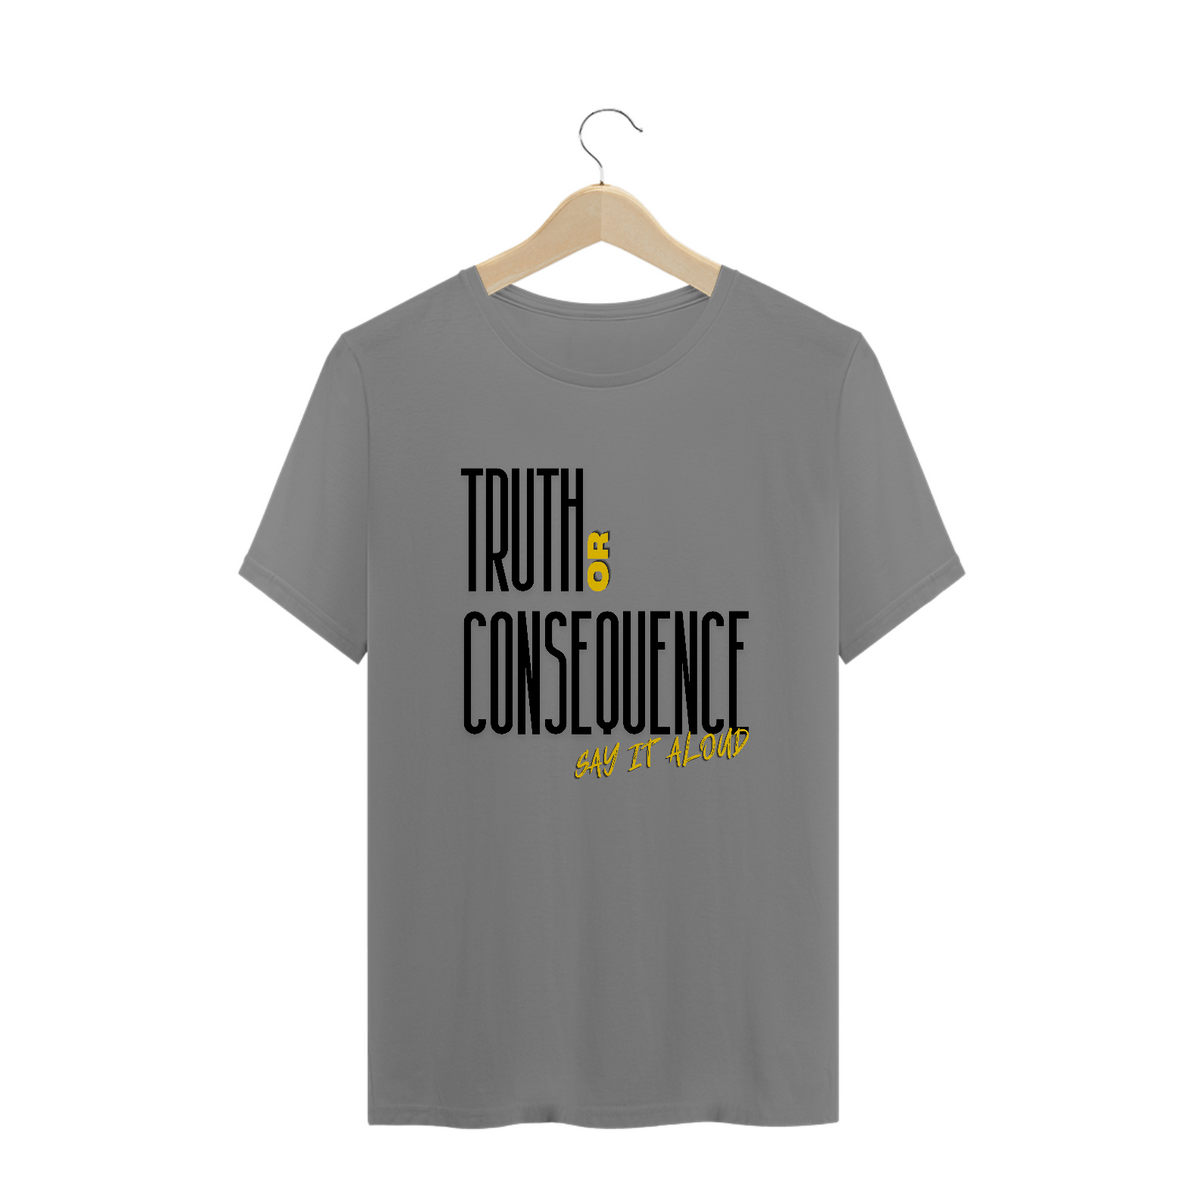 Nome do produto: Camiseta Plus Size Rock On - Truth or consequence